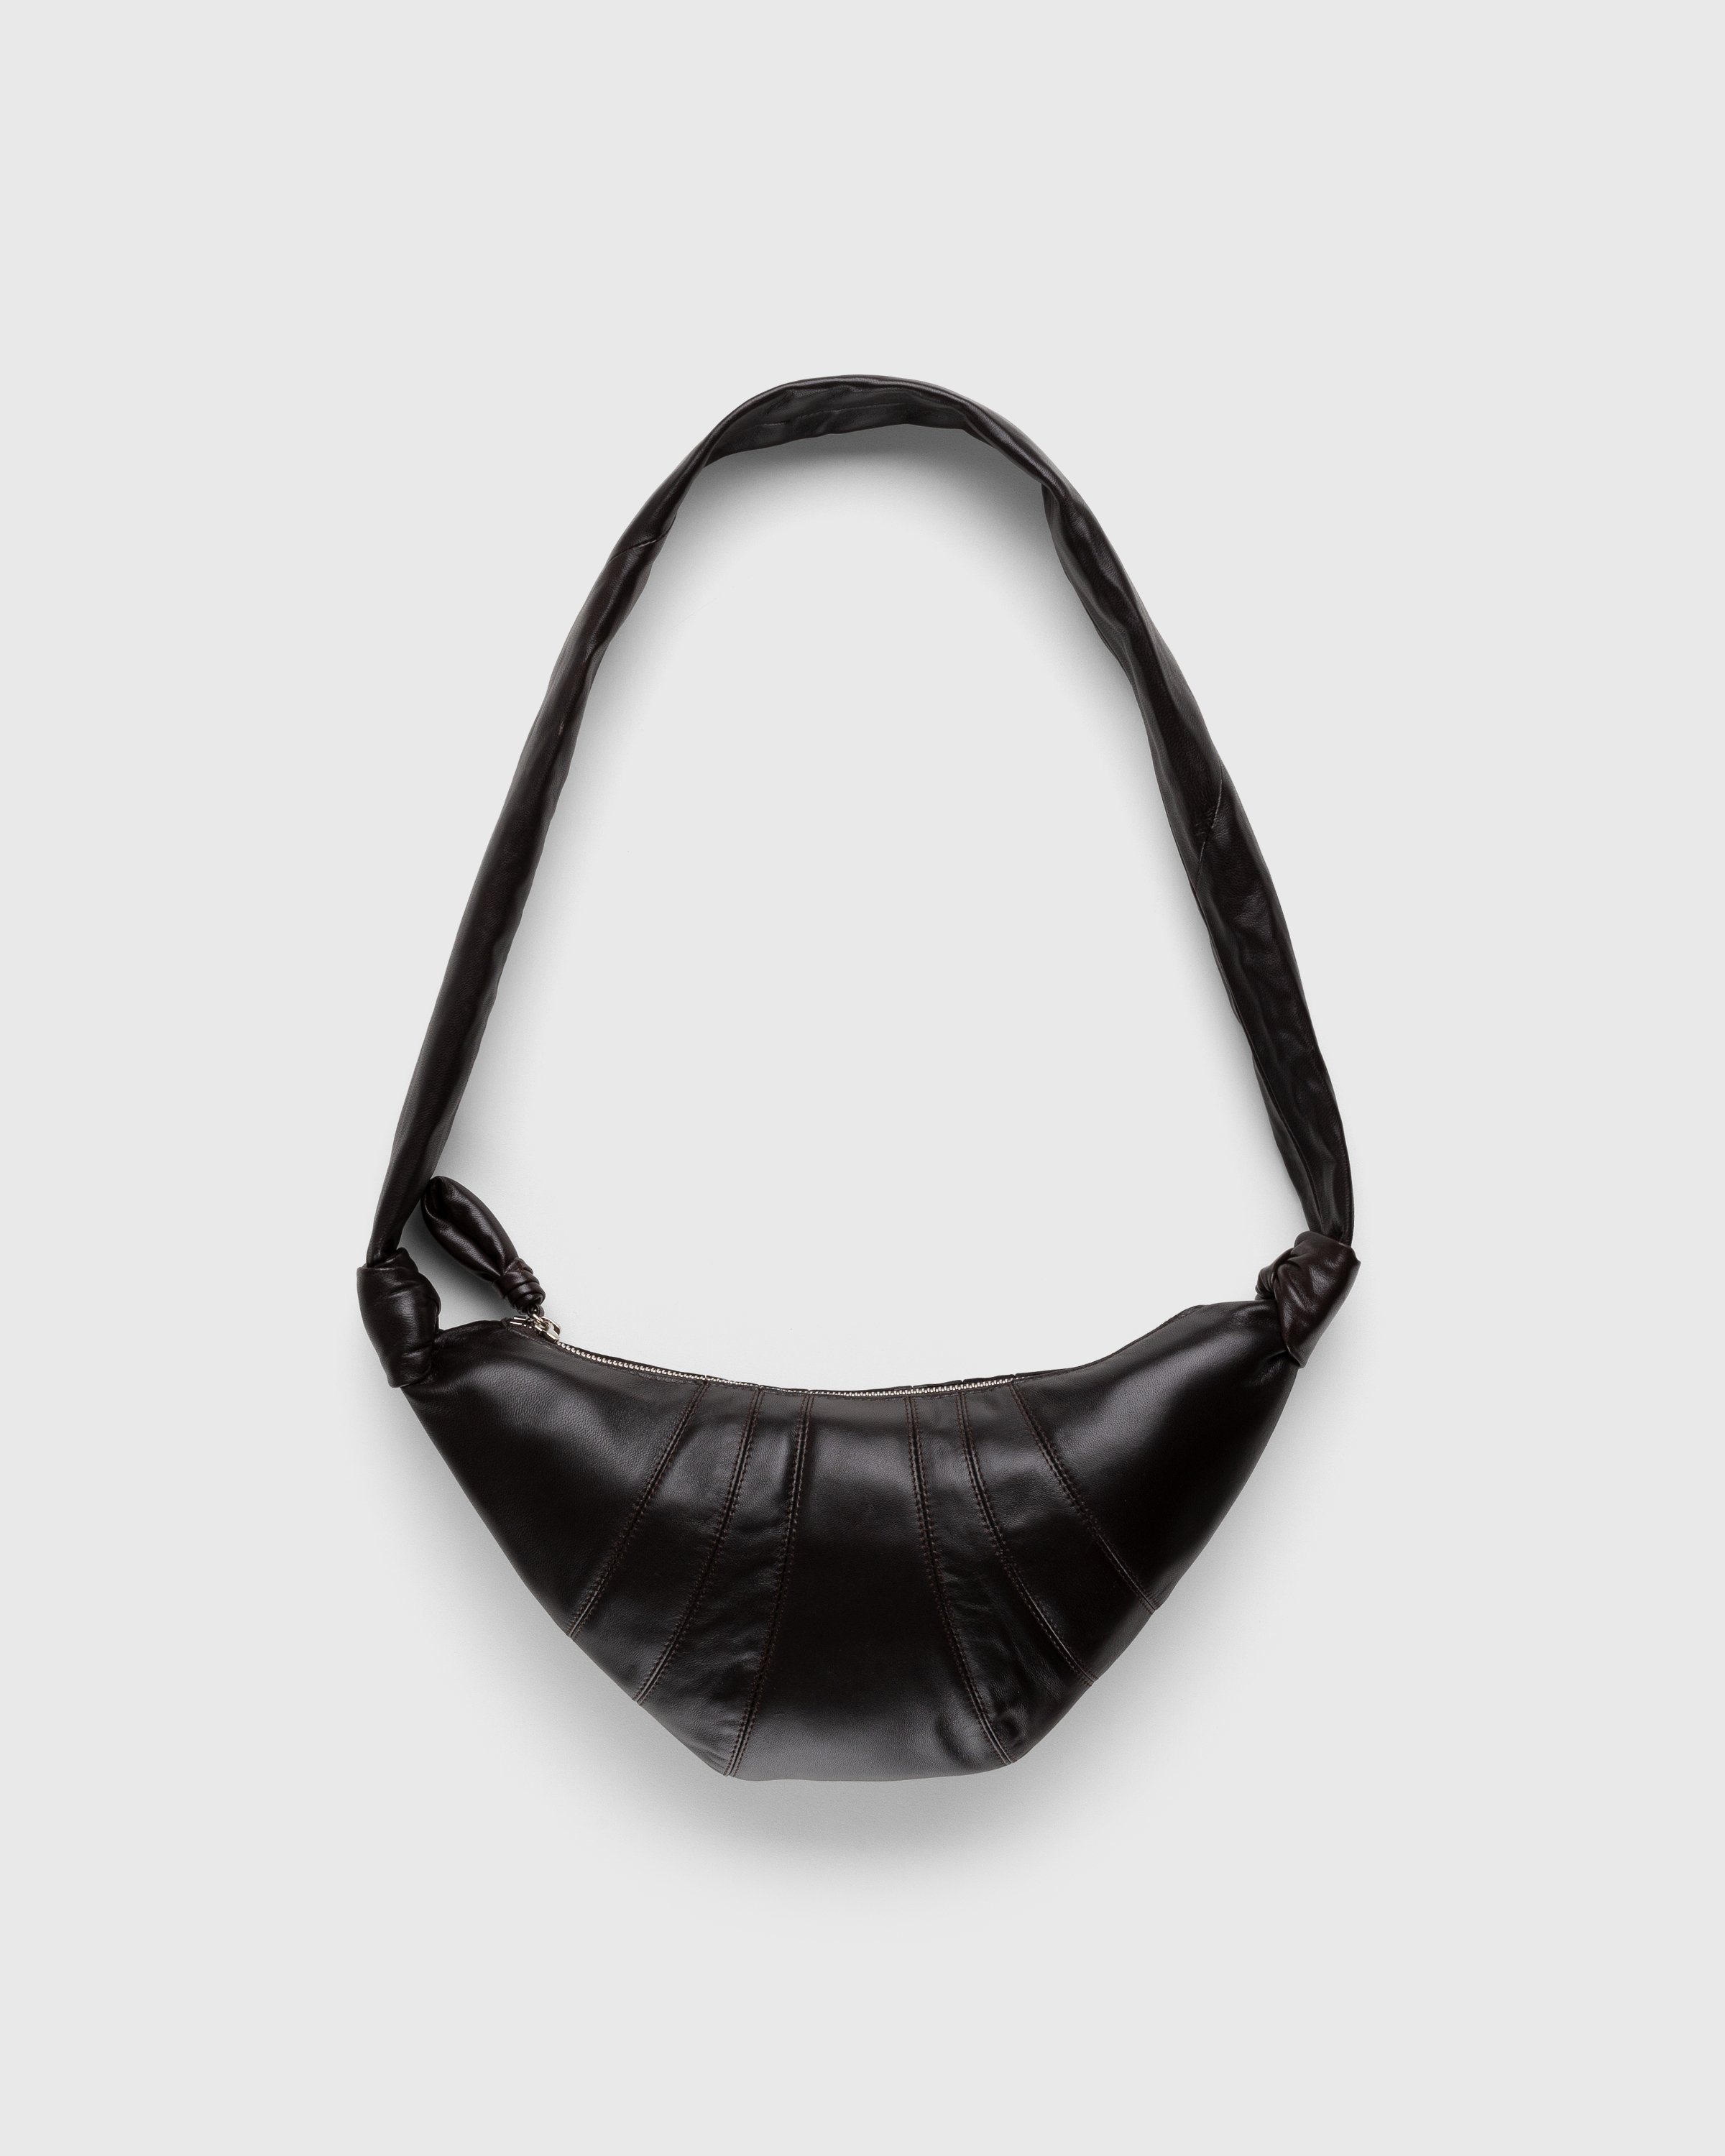 Lemaire x Highsnobiety - Not In Paris 4 Small Croissant Bag Dark Chocolate - Accessories - Black - Image 1